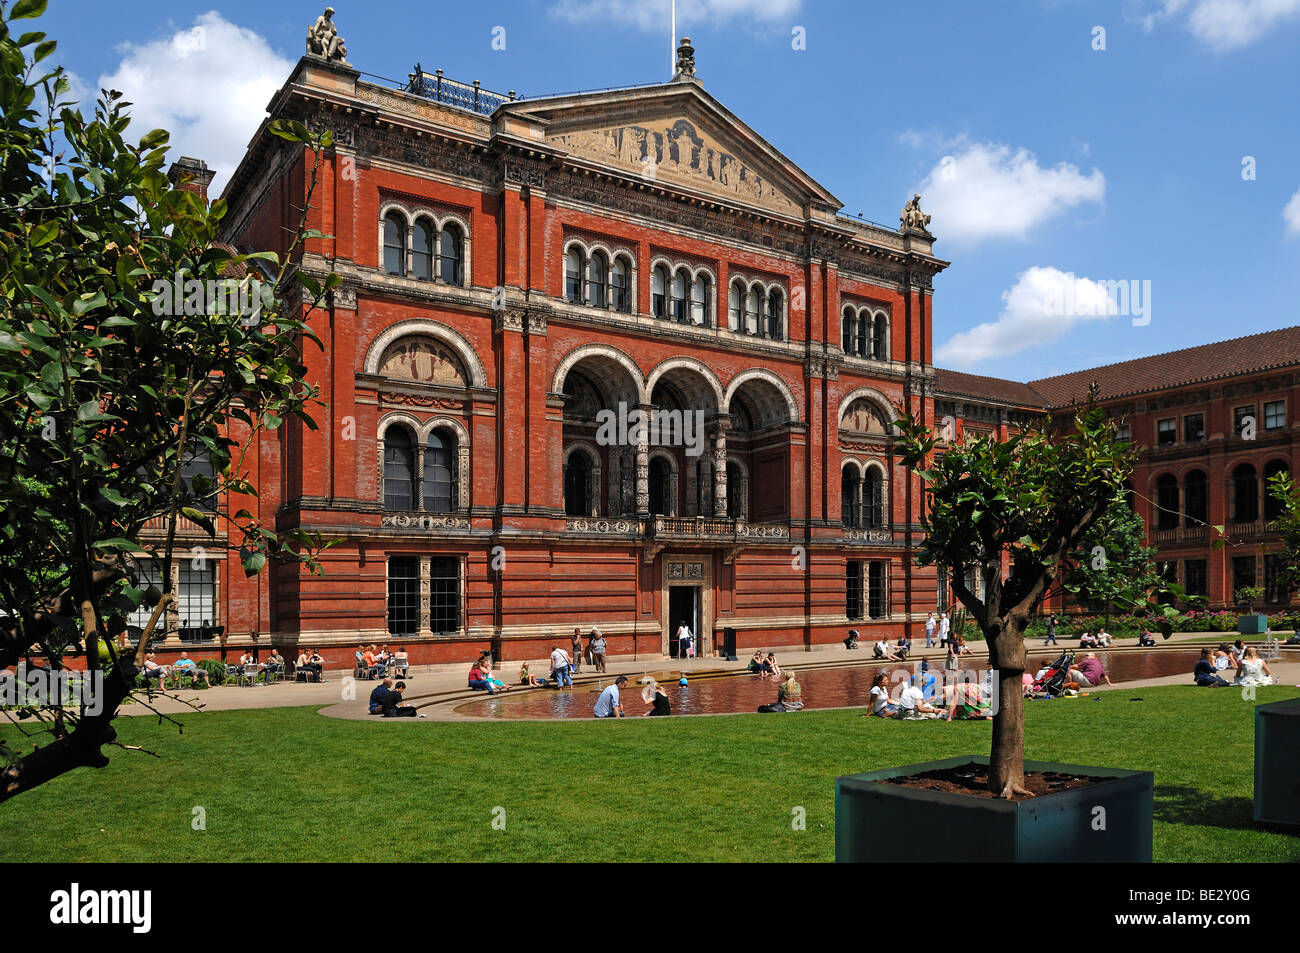 Victoria & Albert Museum and courtyard, 1-5 Exhibition Road, London, England, UK, Europe Stock Photo